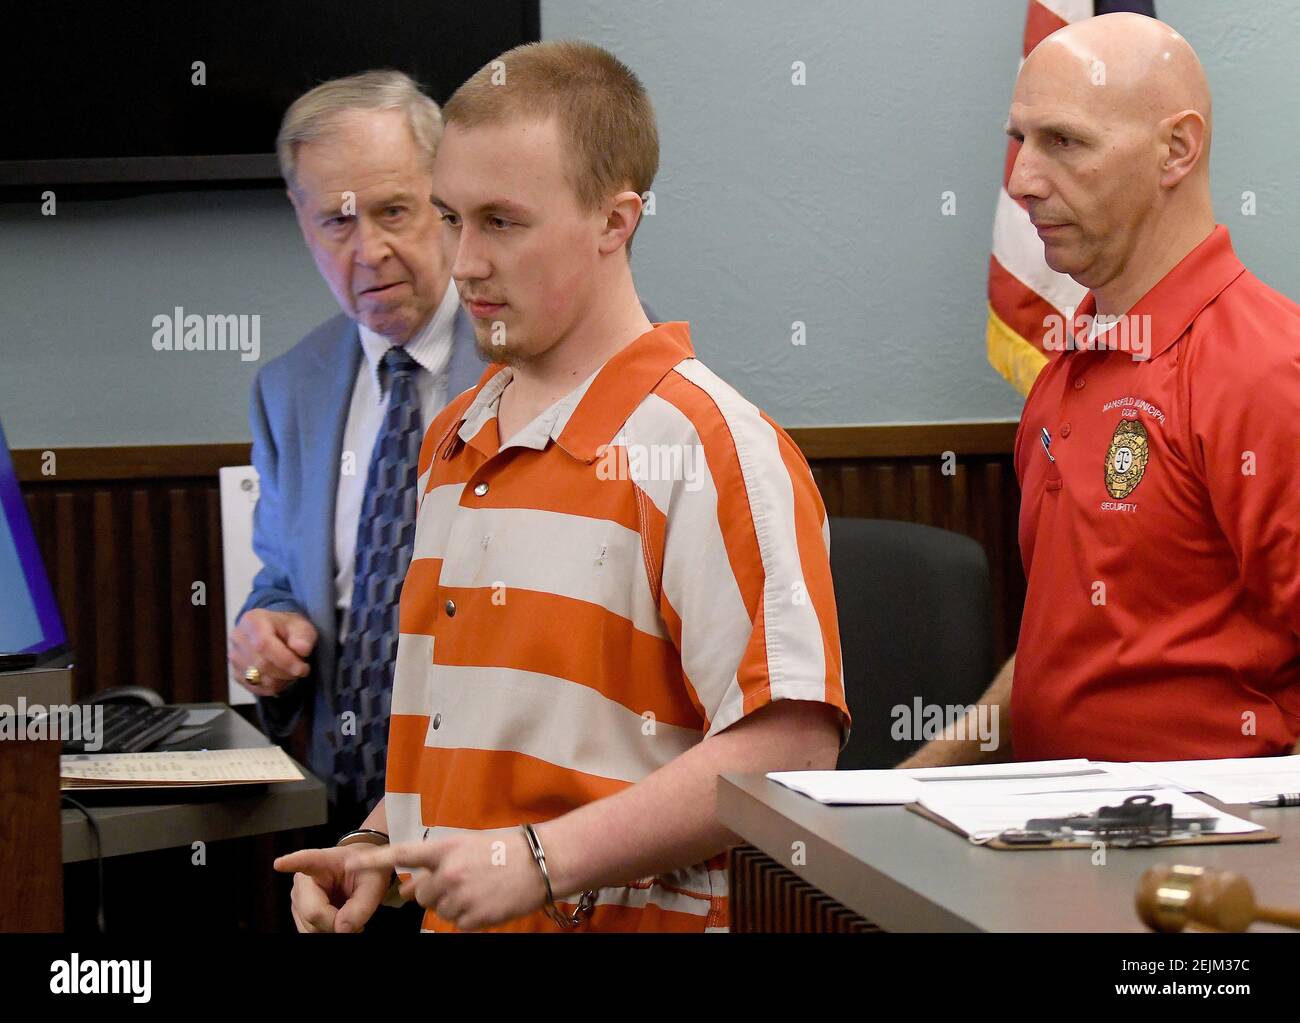 Murder suspect Alec Blair, accused of killing his wife Gaberien Clevenger, motions to someone in the gallery as he walks into court Thursday for his preliminary hearing. 1 Blair Motions (Photo by Jason J. Molyet/News Journal, Mansfield News Journal via Imagn Content Services, LLC/USA Today Network/Sipa USA) Stock Photo